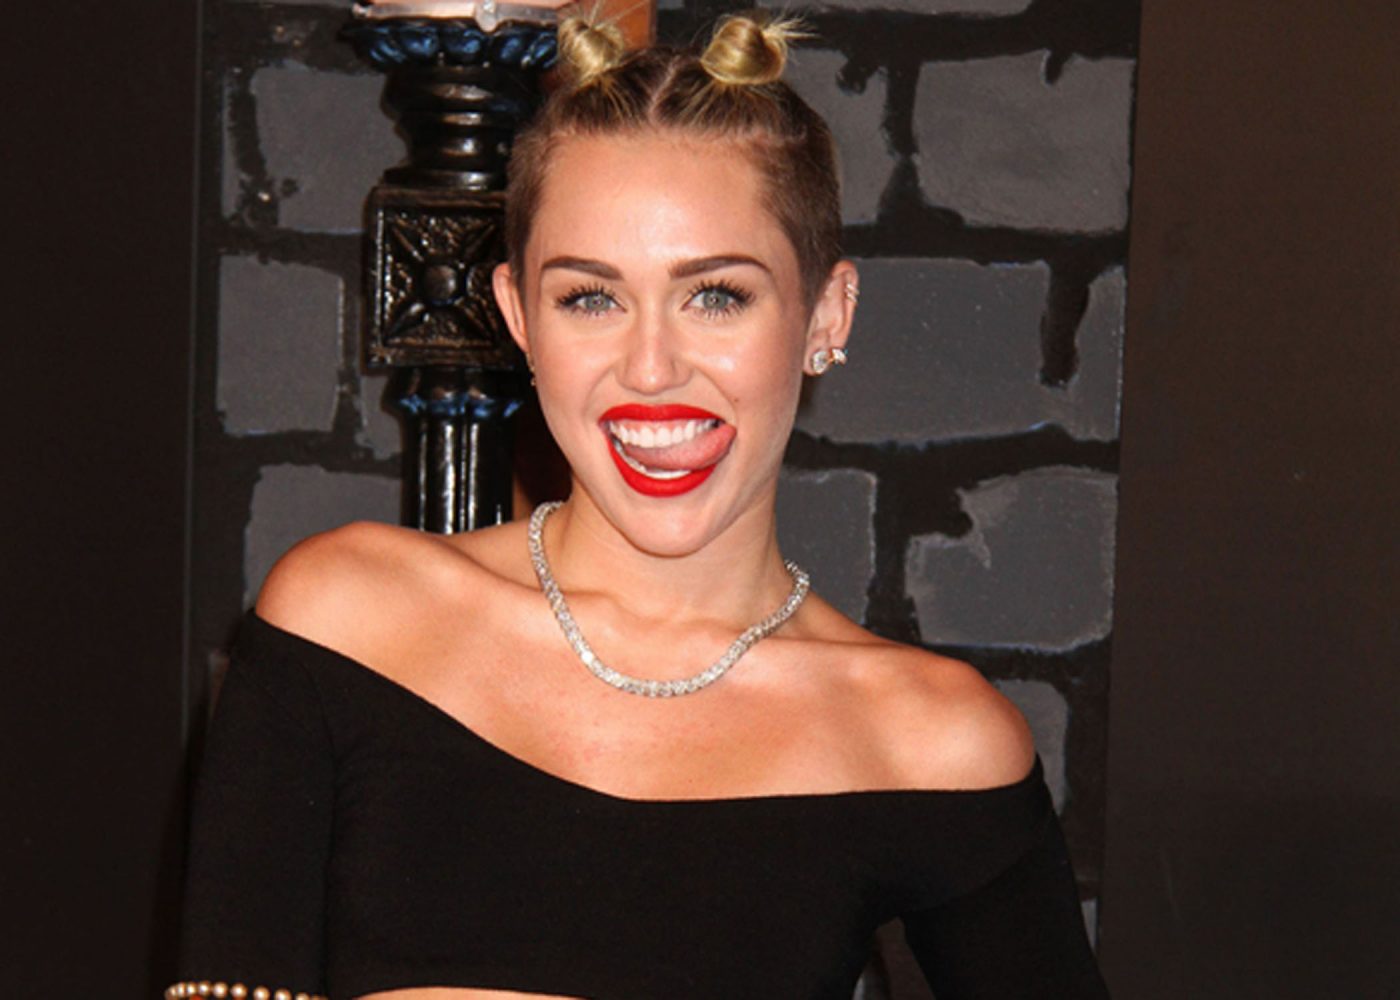 Miley+Cyrus+attend+the+2013+MTV+Video+Music+Awards+at+The+Barclay+Center+in+New+York+City%2C+NY%2C+Sunday%2C+August+25%2C+2013.+%28Nancy+Kaszerman%2FZuma+Press%2FMCT%29